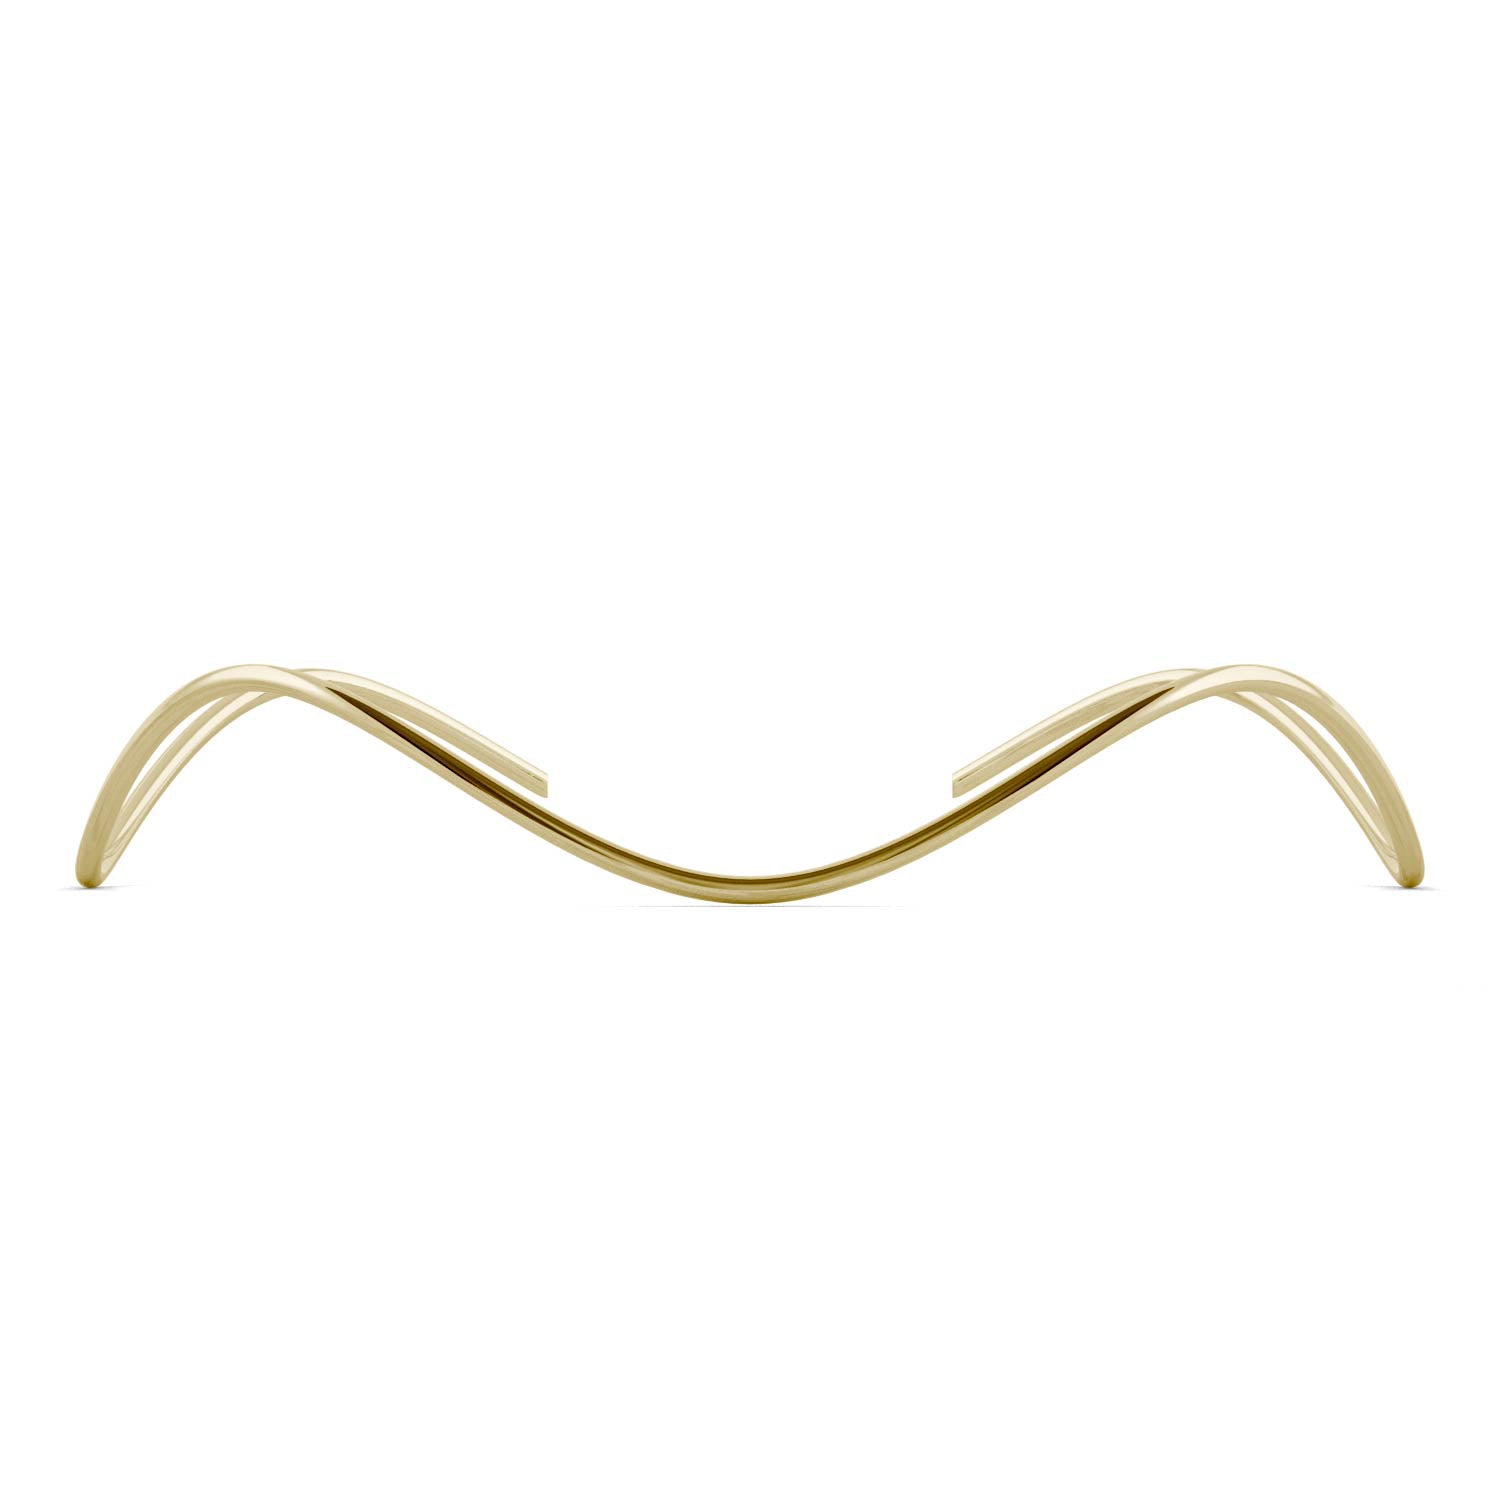 Ouro Collection Waves Bangle Bracelet